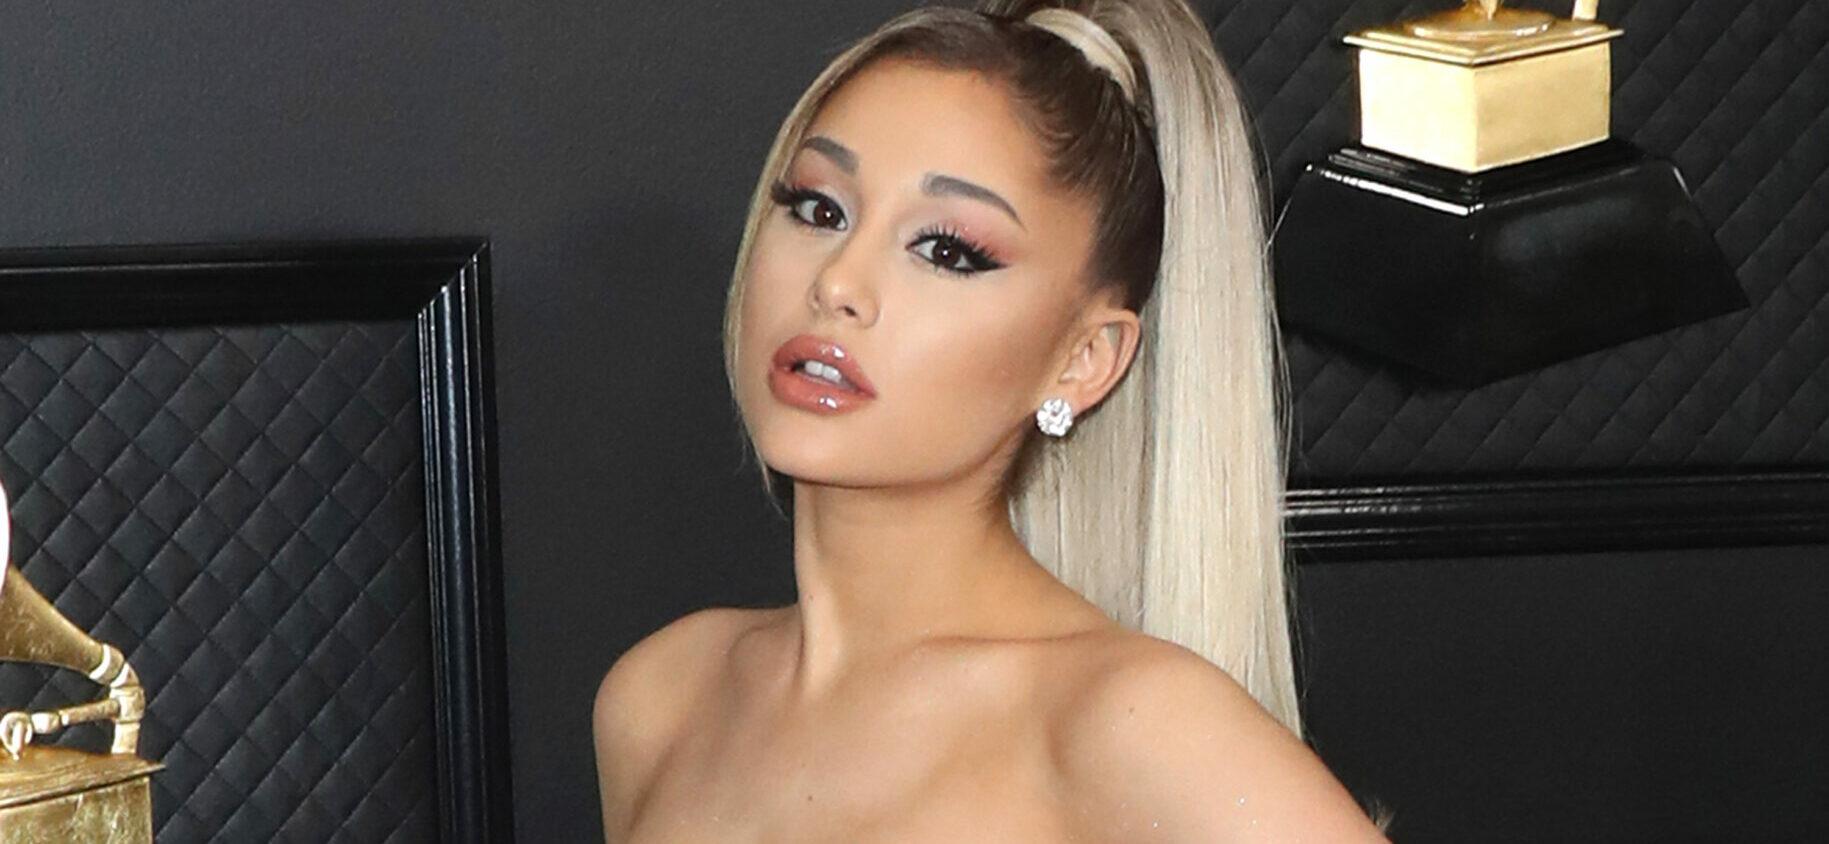 Ariana Grande’s Alleged Stalker Threatens To Kill Her, Pulls ‘Large Hunting Knife’